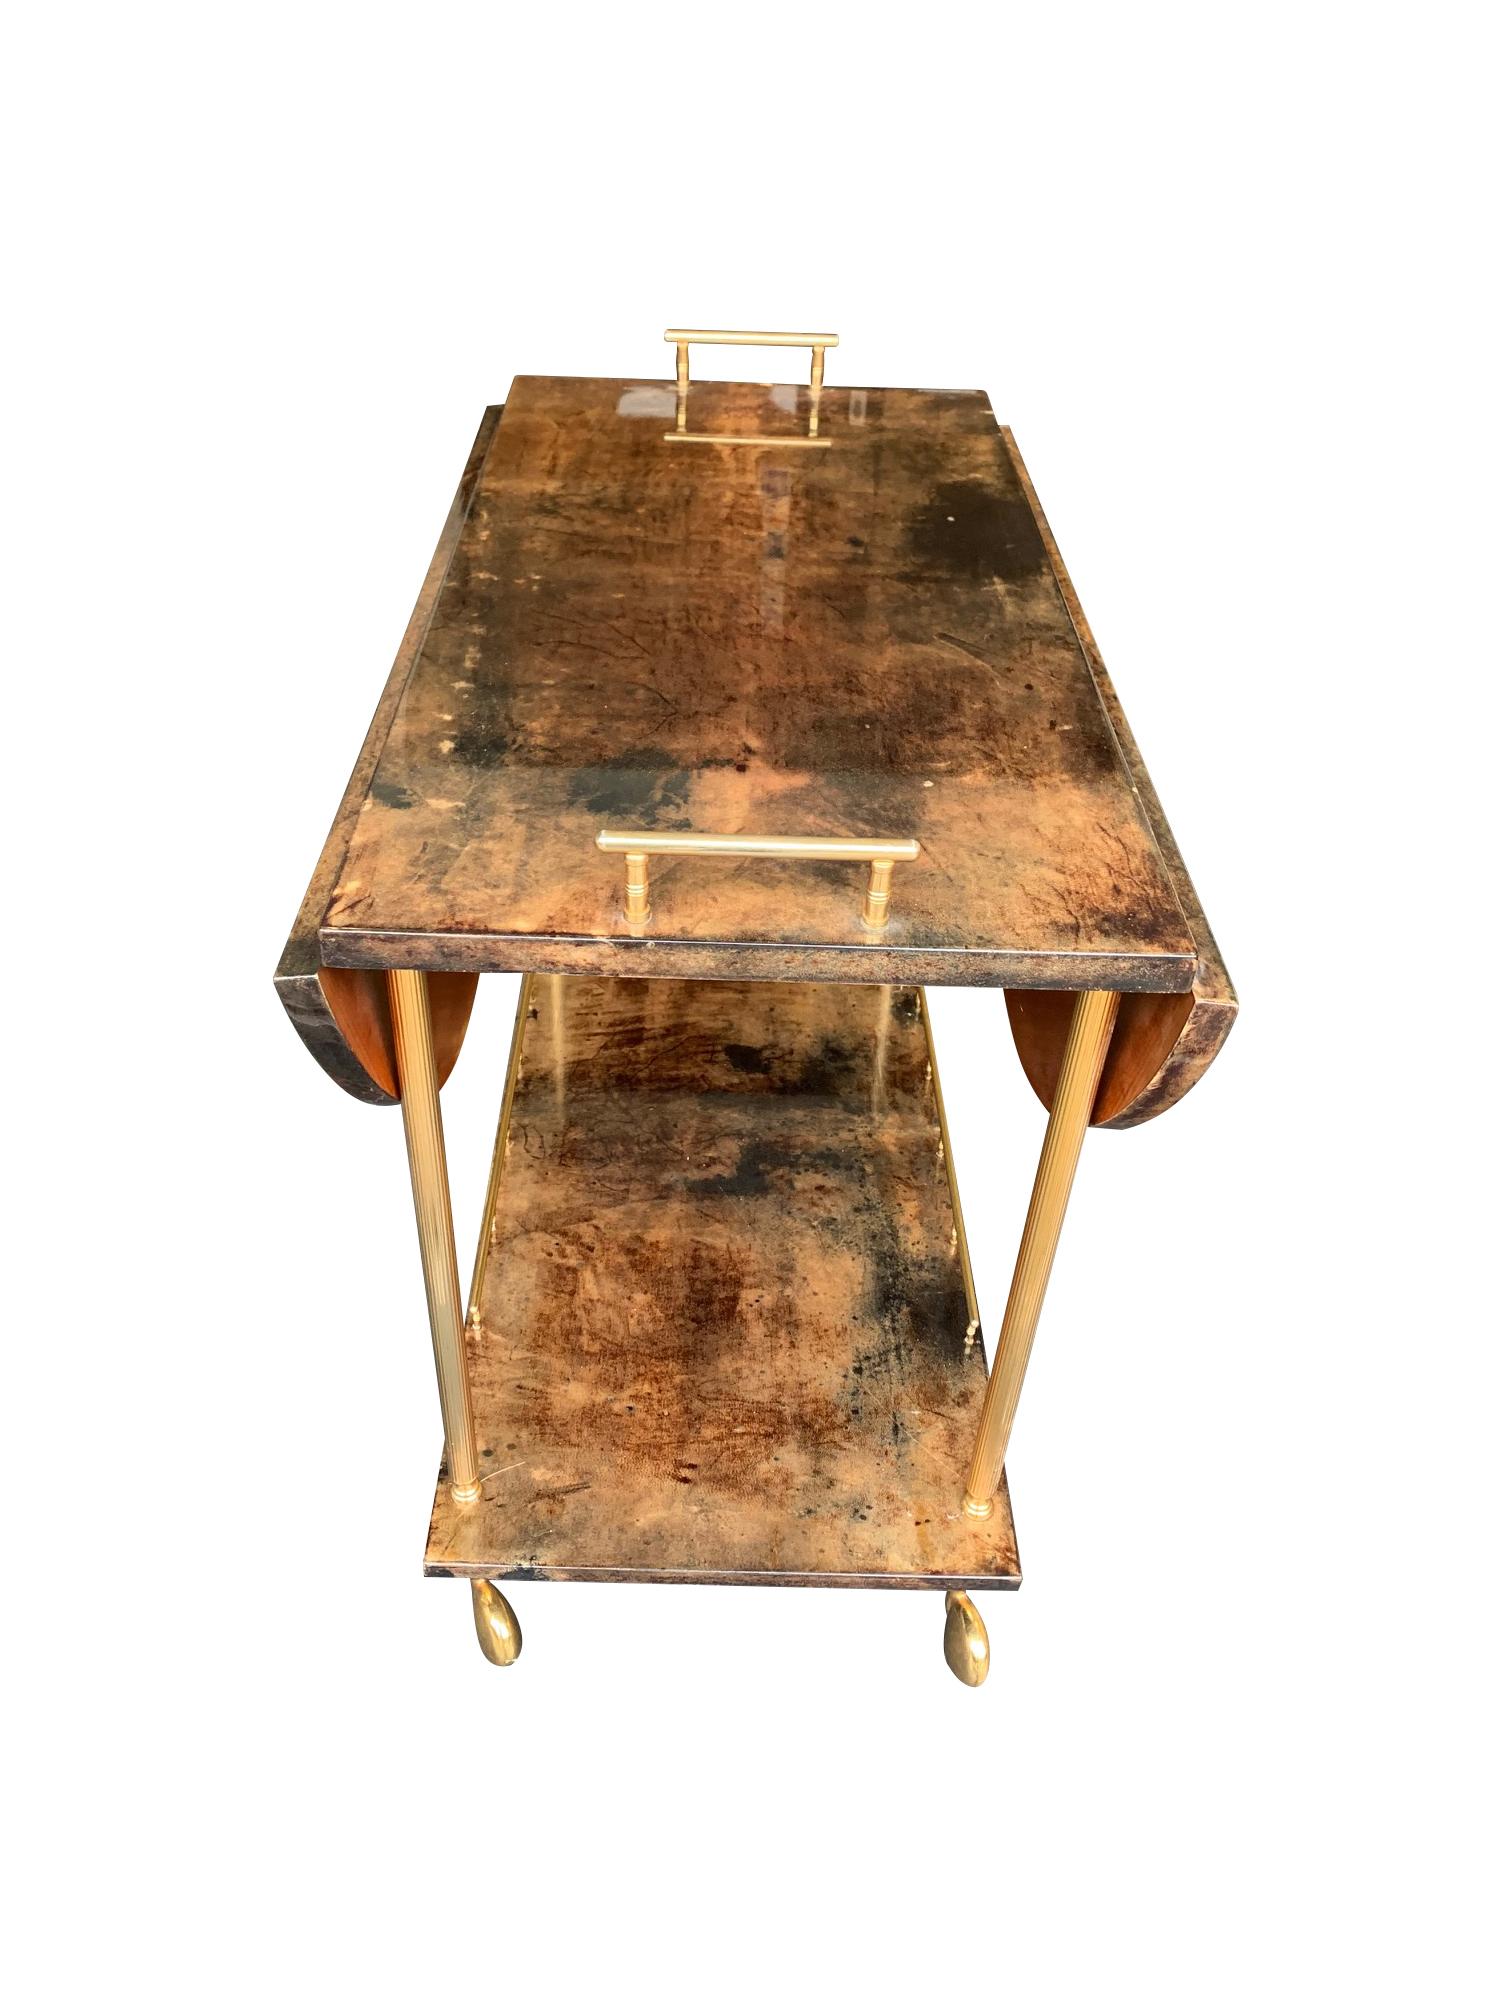 Aldo Tura 1960s Lacquered Goatskin Bar Cart with Extendable Top In Good Condition In London, GB